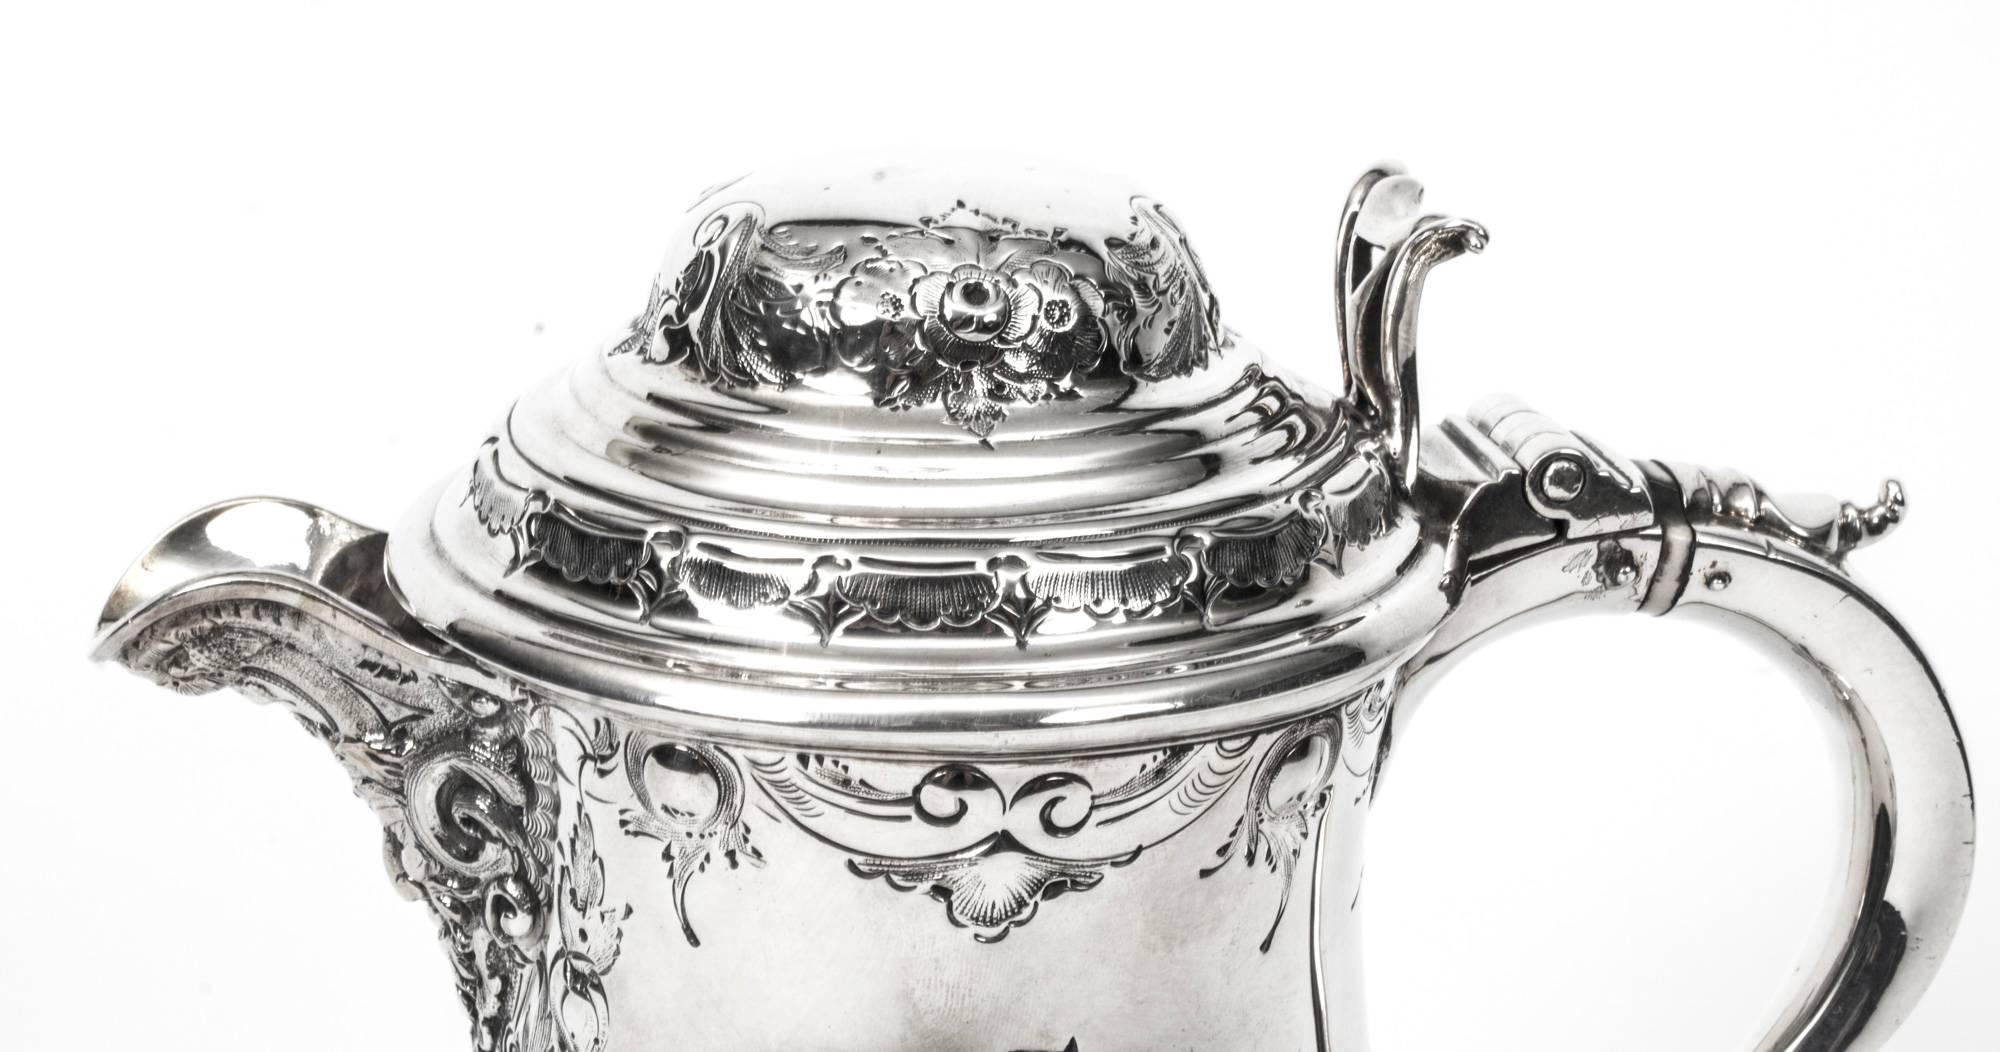 A very attractive silver plate ewer in the Classic English style with fabulous engraved and embossed decoration, C1860 in date and bearing the makers mark of the renowned silversmiths Martin Hall & Co.

The underside makers mark anf the